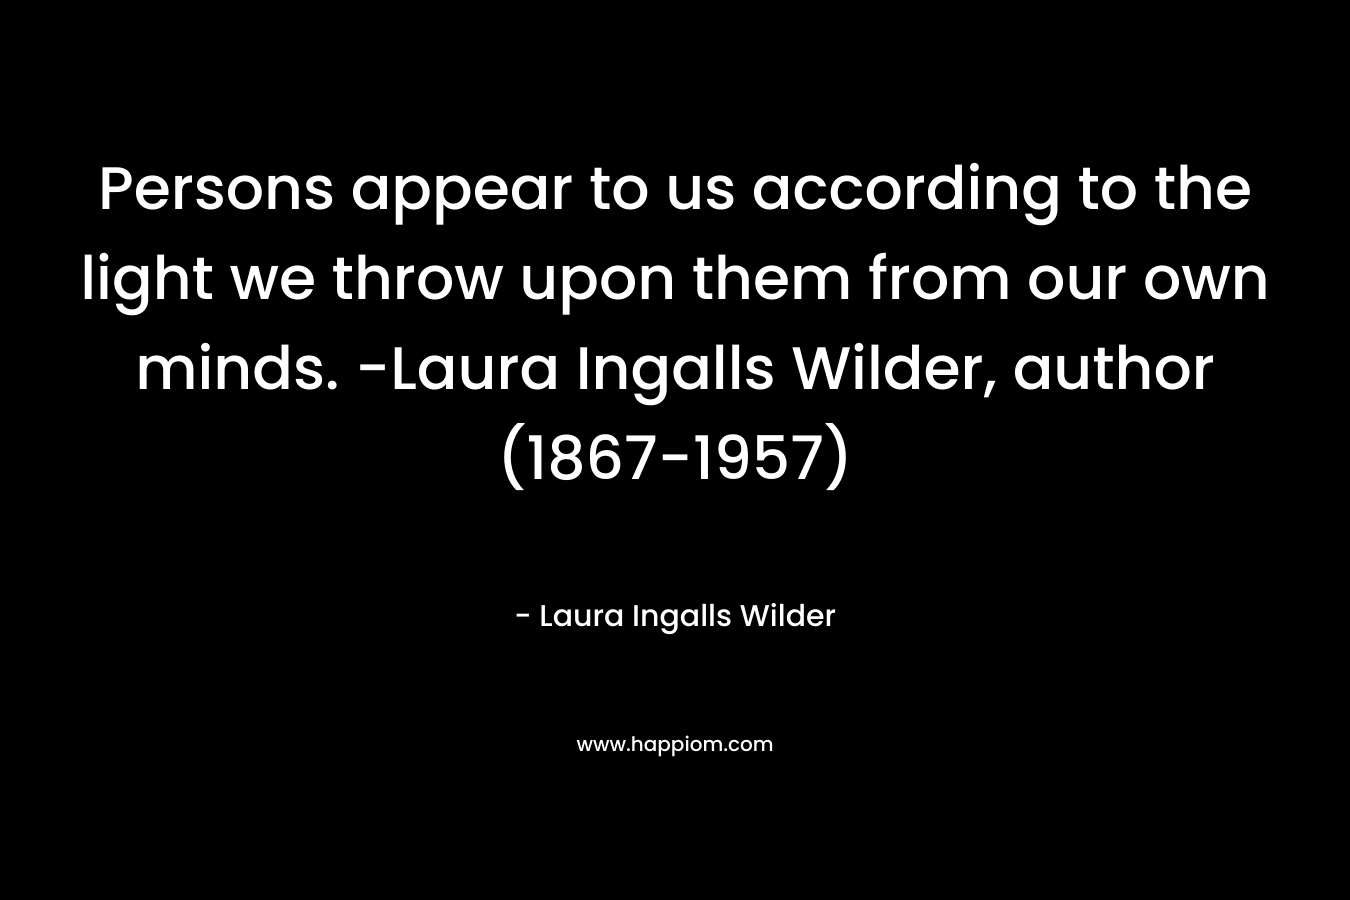 Persons appear to us according to the light we throw upon them from our own minds. -Laura Ingalls Wilder, author (1867-1957) – Laura Ingalls Wilder